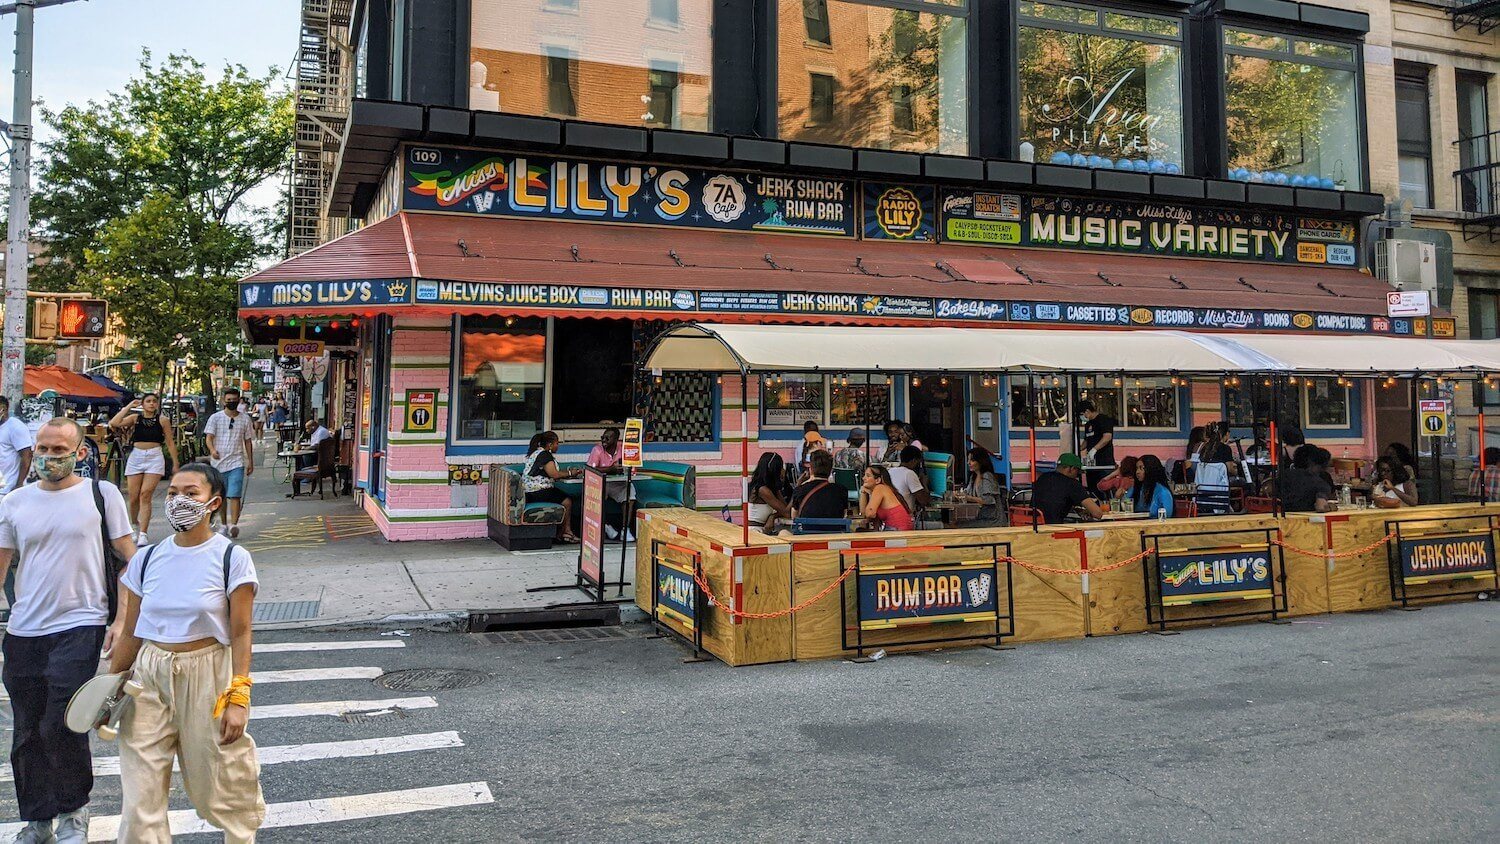 Outdoor dining and passerby at Miss Lily's in Lower Manhattan. Sidewalk space is suddenly in even shorter supply thanks to the Covid-19 pandemic. November 2020